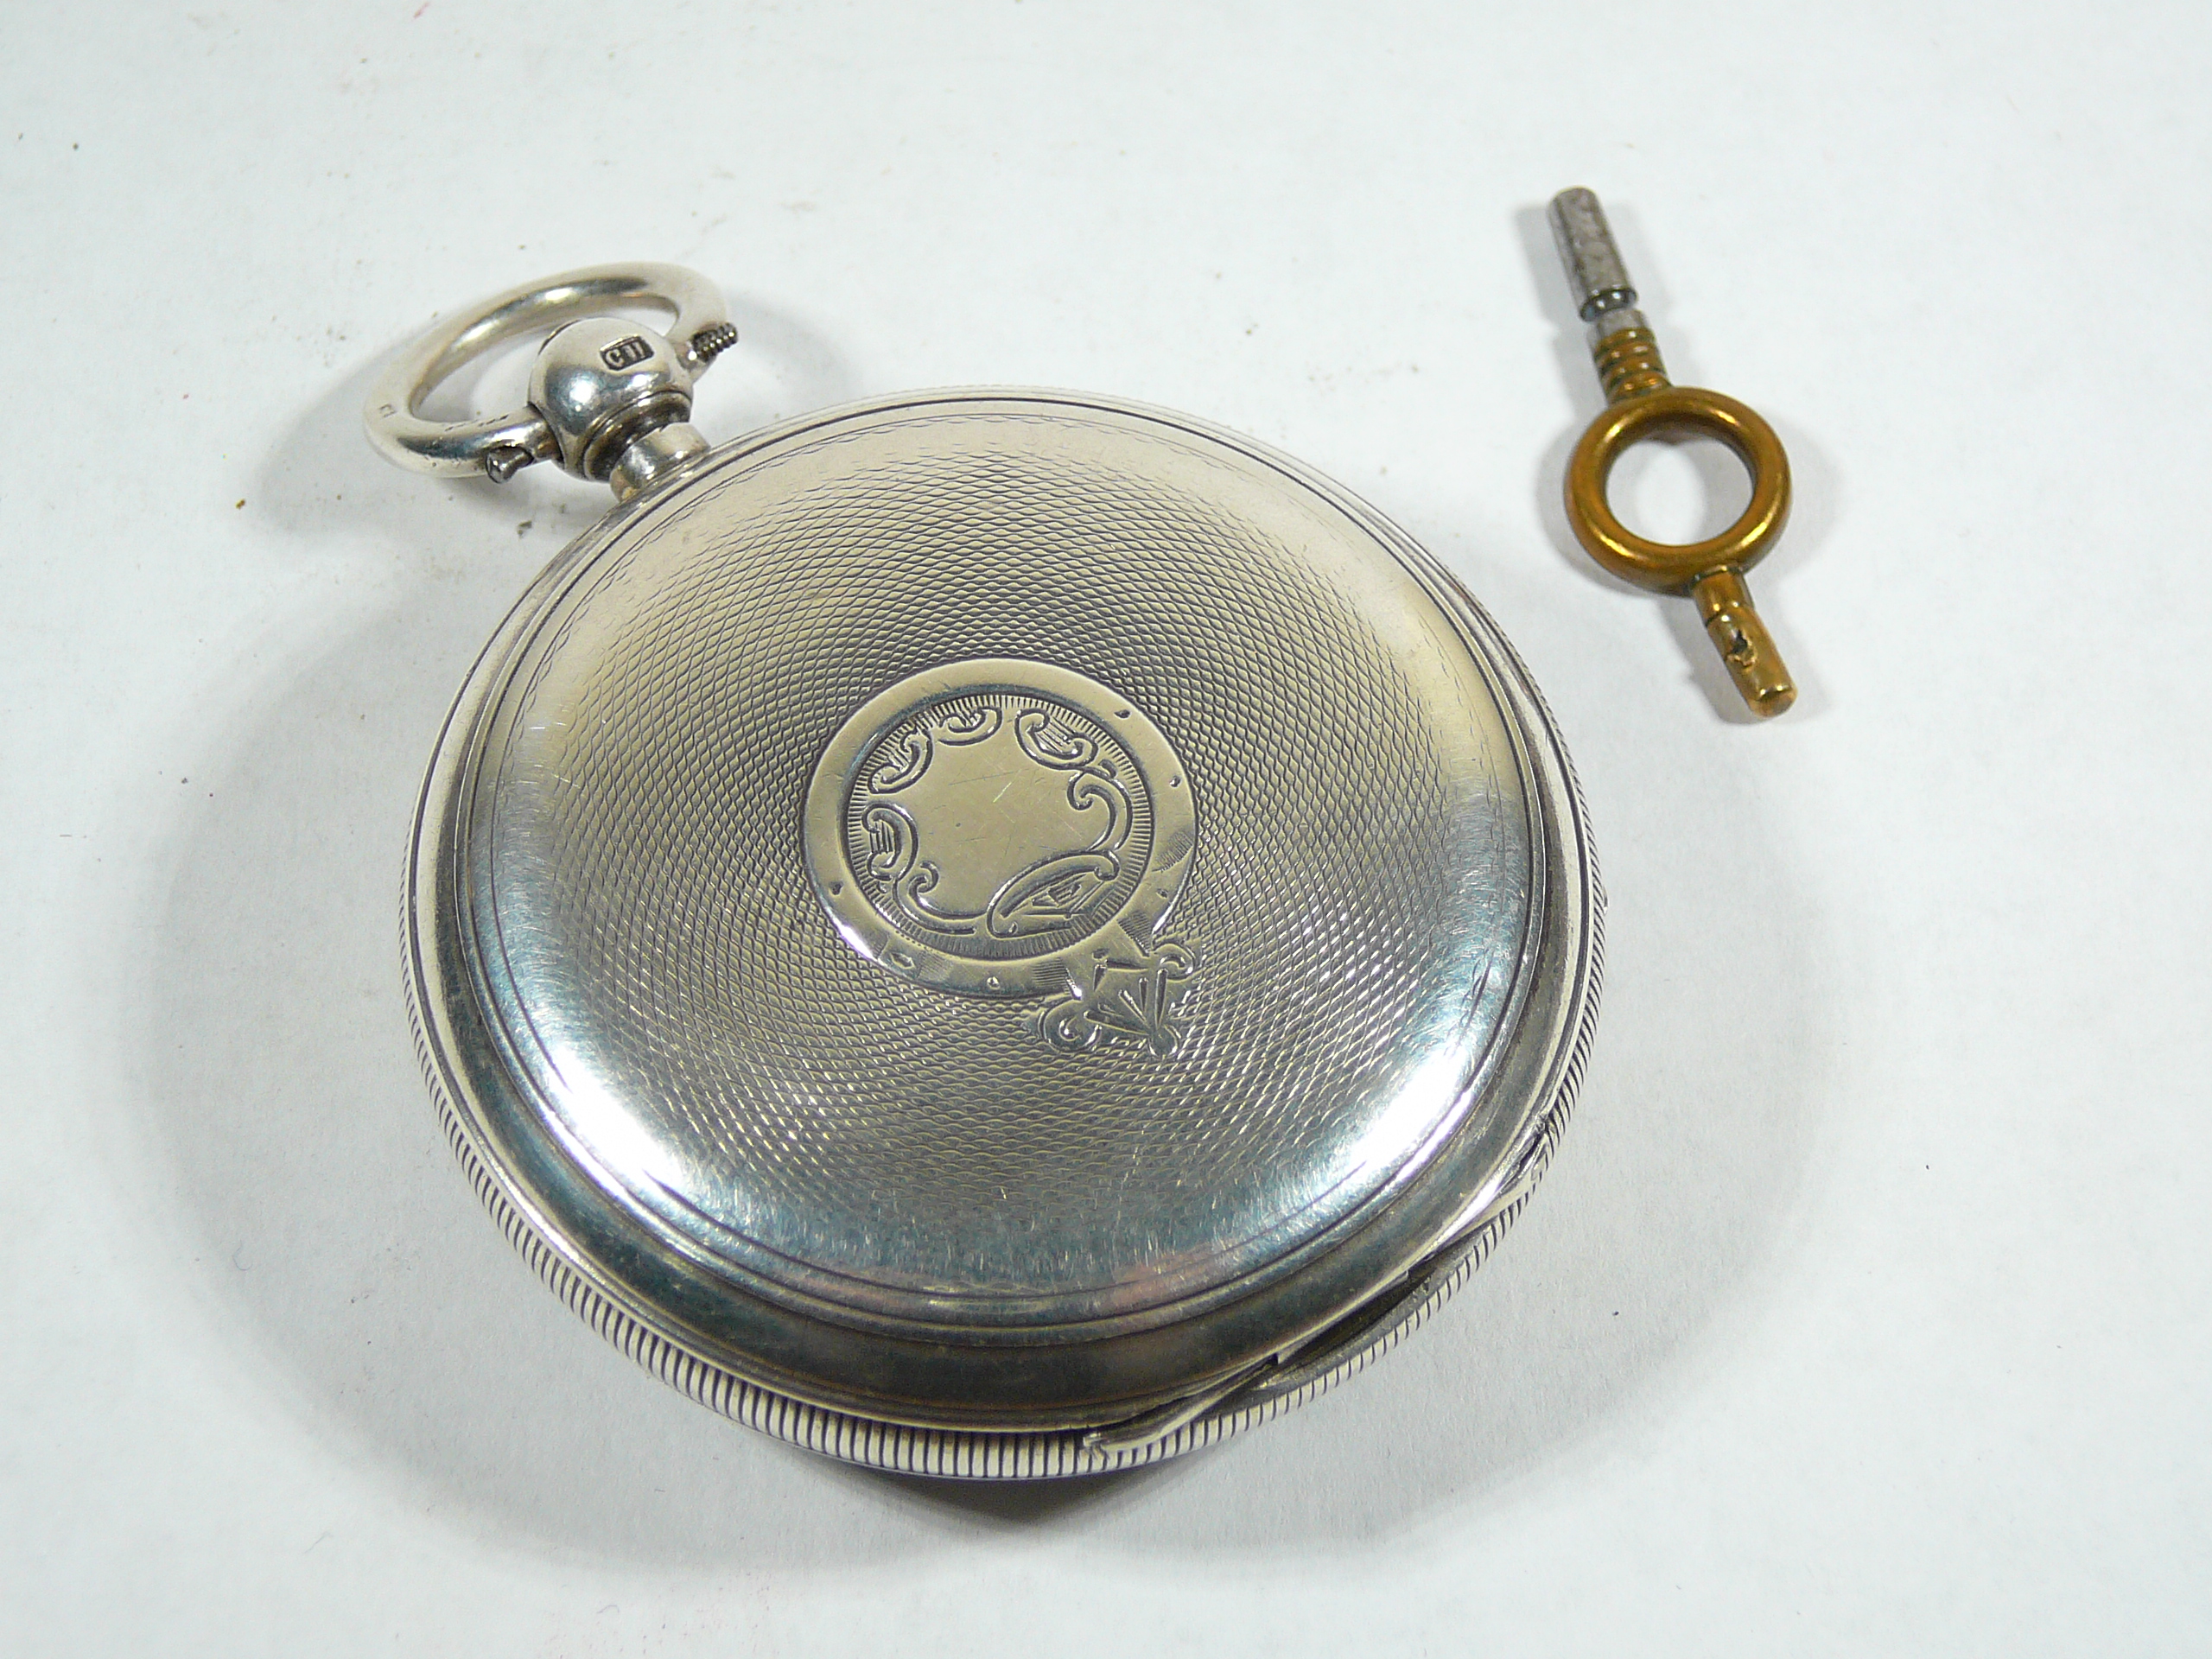 Gents Antique Silver Pocket Watch - Image 2 of 4